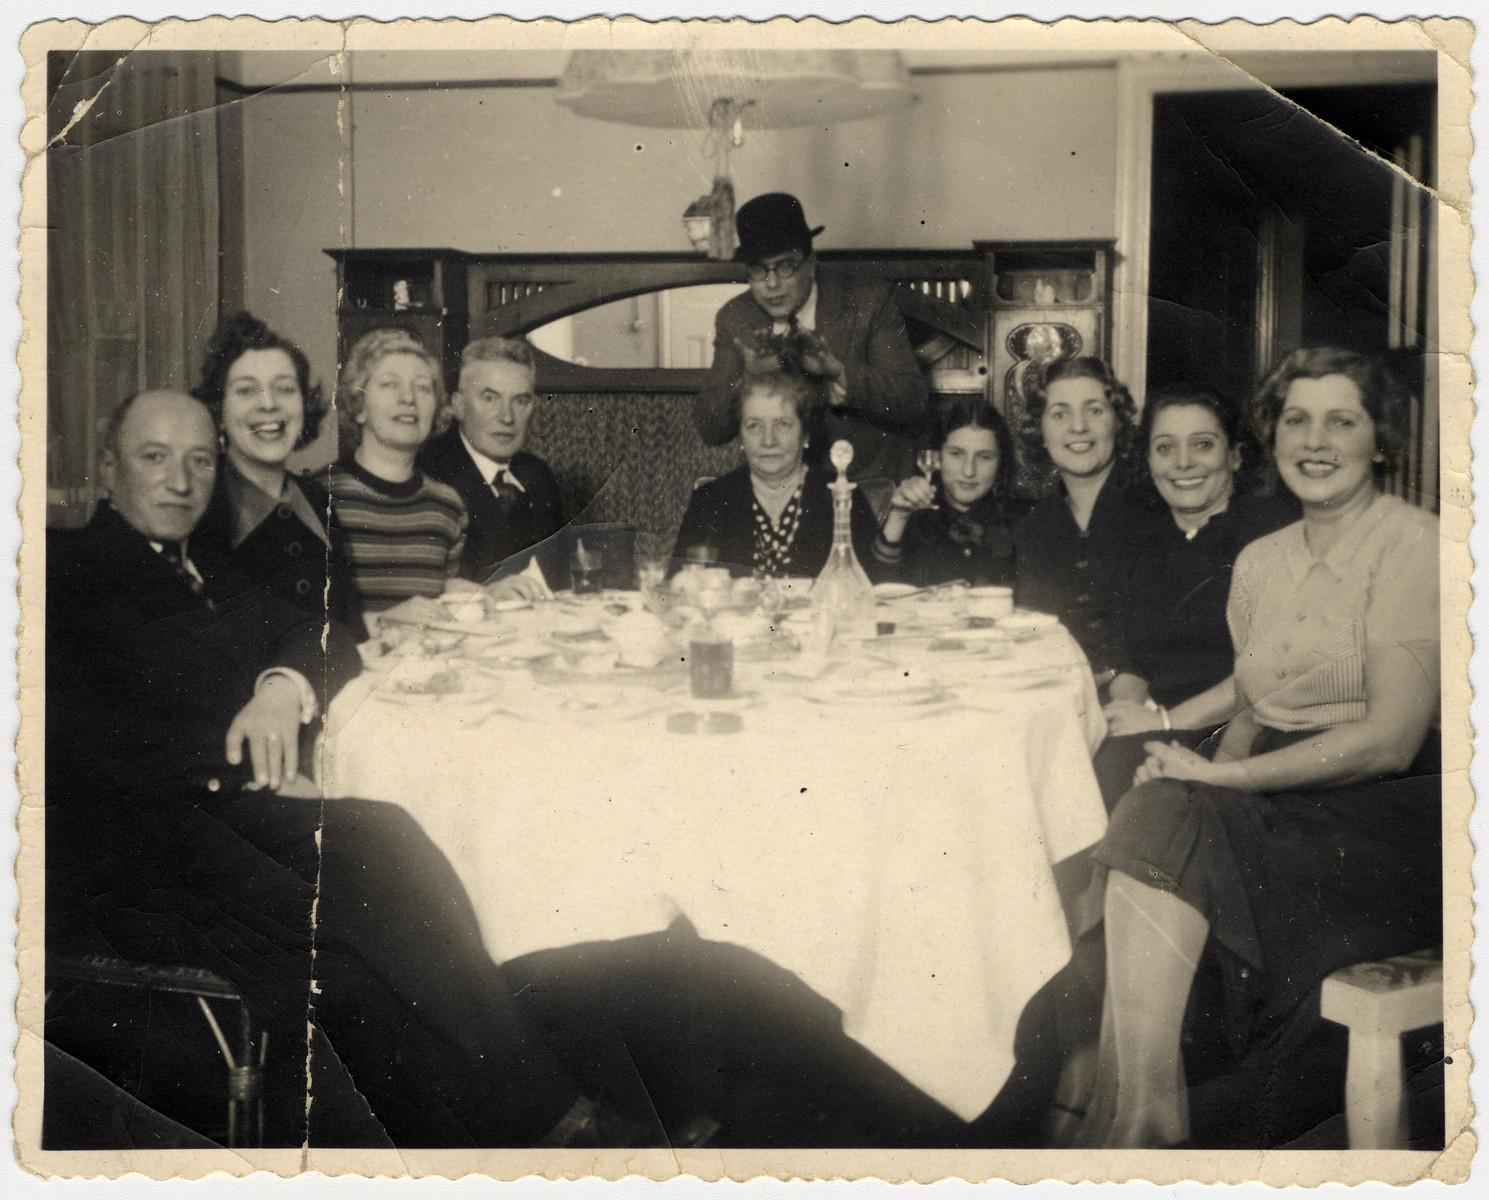 A Latvian-Jewish family gathers around its dining room table.  The photo was taken in the home of the donor's aunt, Gusti Jakobson Akermann.

Left to right: Oskar (Gusti's husband), Lena and Rita Jakobson (sisters of Klara and Gusti), Marta Schiftan (the mother-in-law of Tania Jakobson Schiftan), Luba Akermann, Klara Schwab, Hermina Jakobson, and Gusti Akermann.